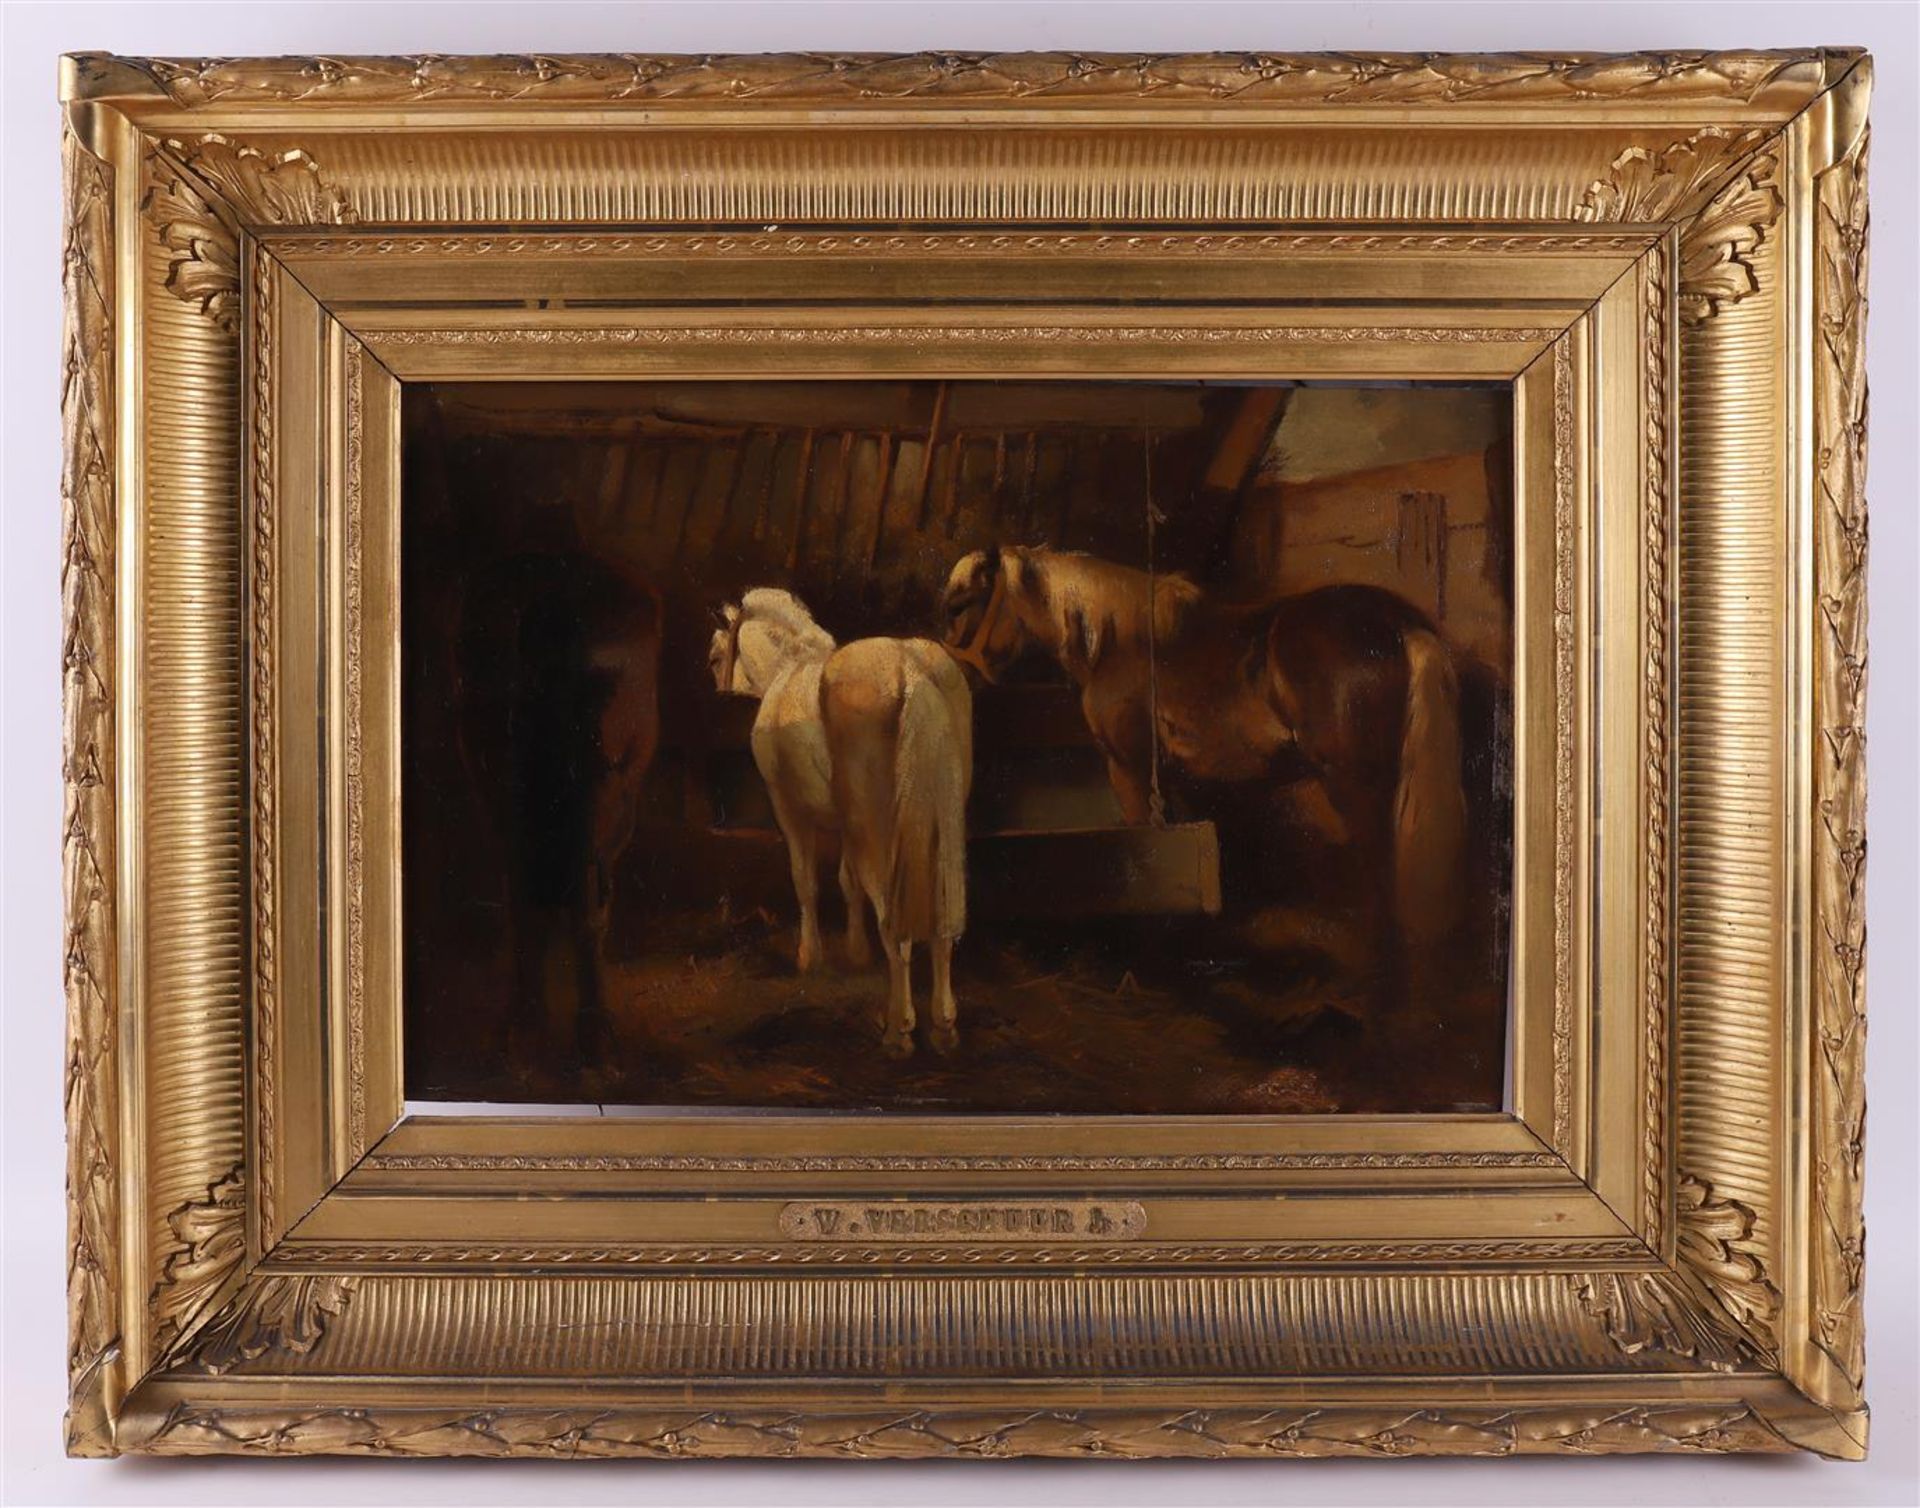 Verschuur, W Jr. (attributed to) “Horses in the stable”,